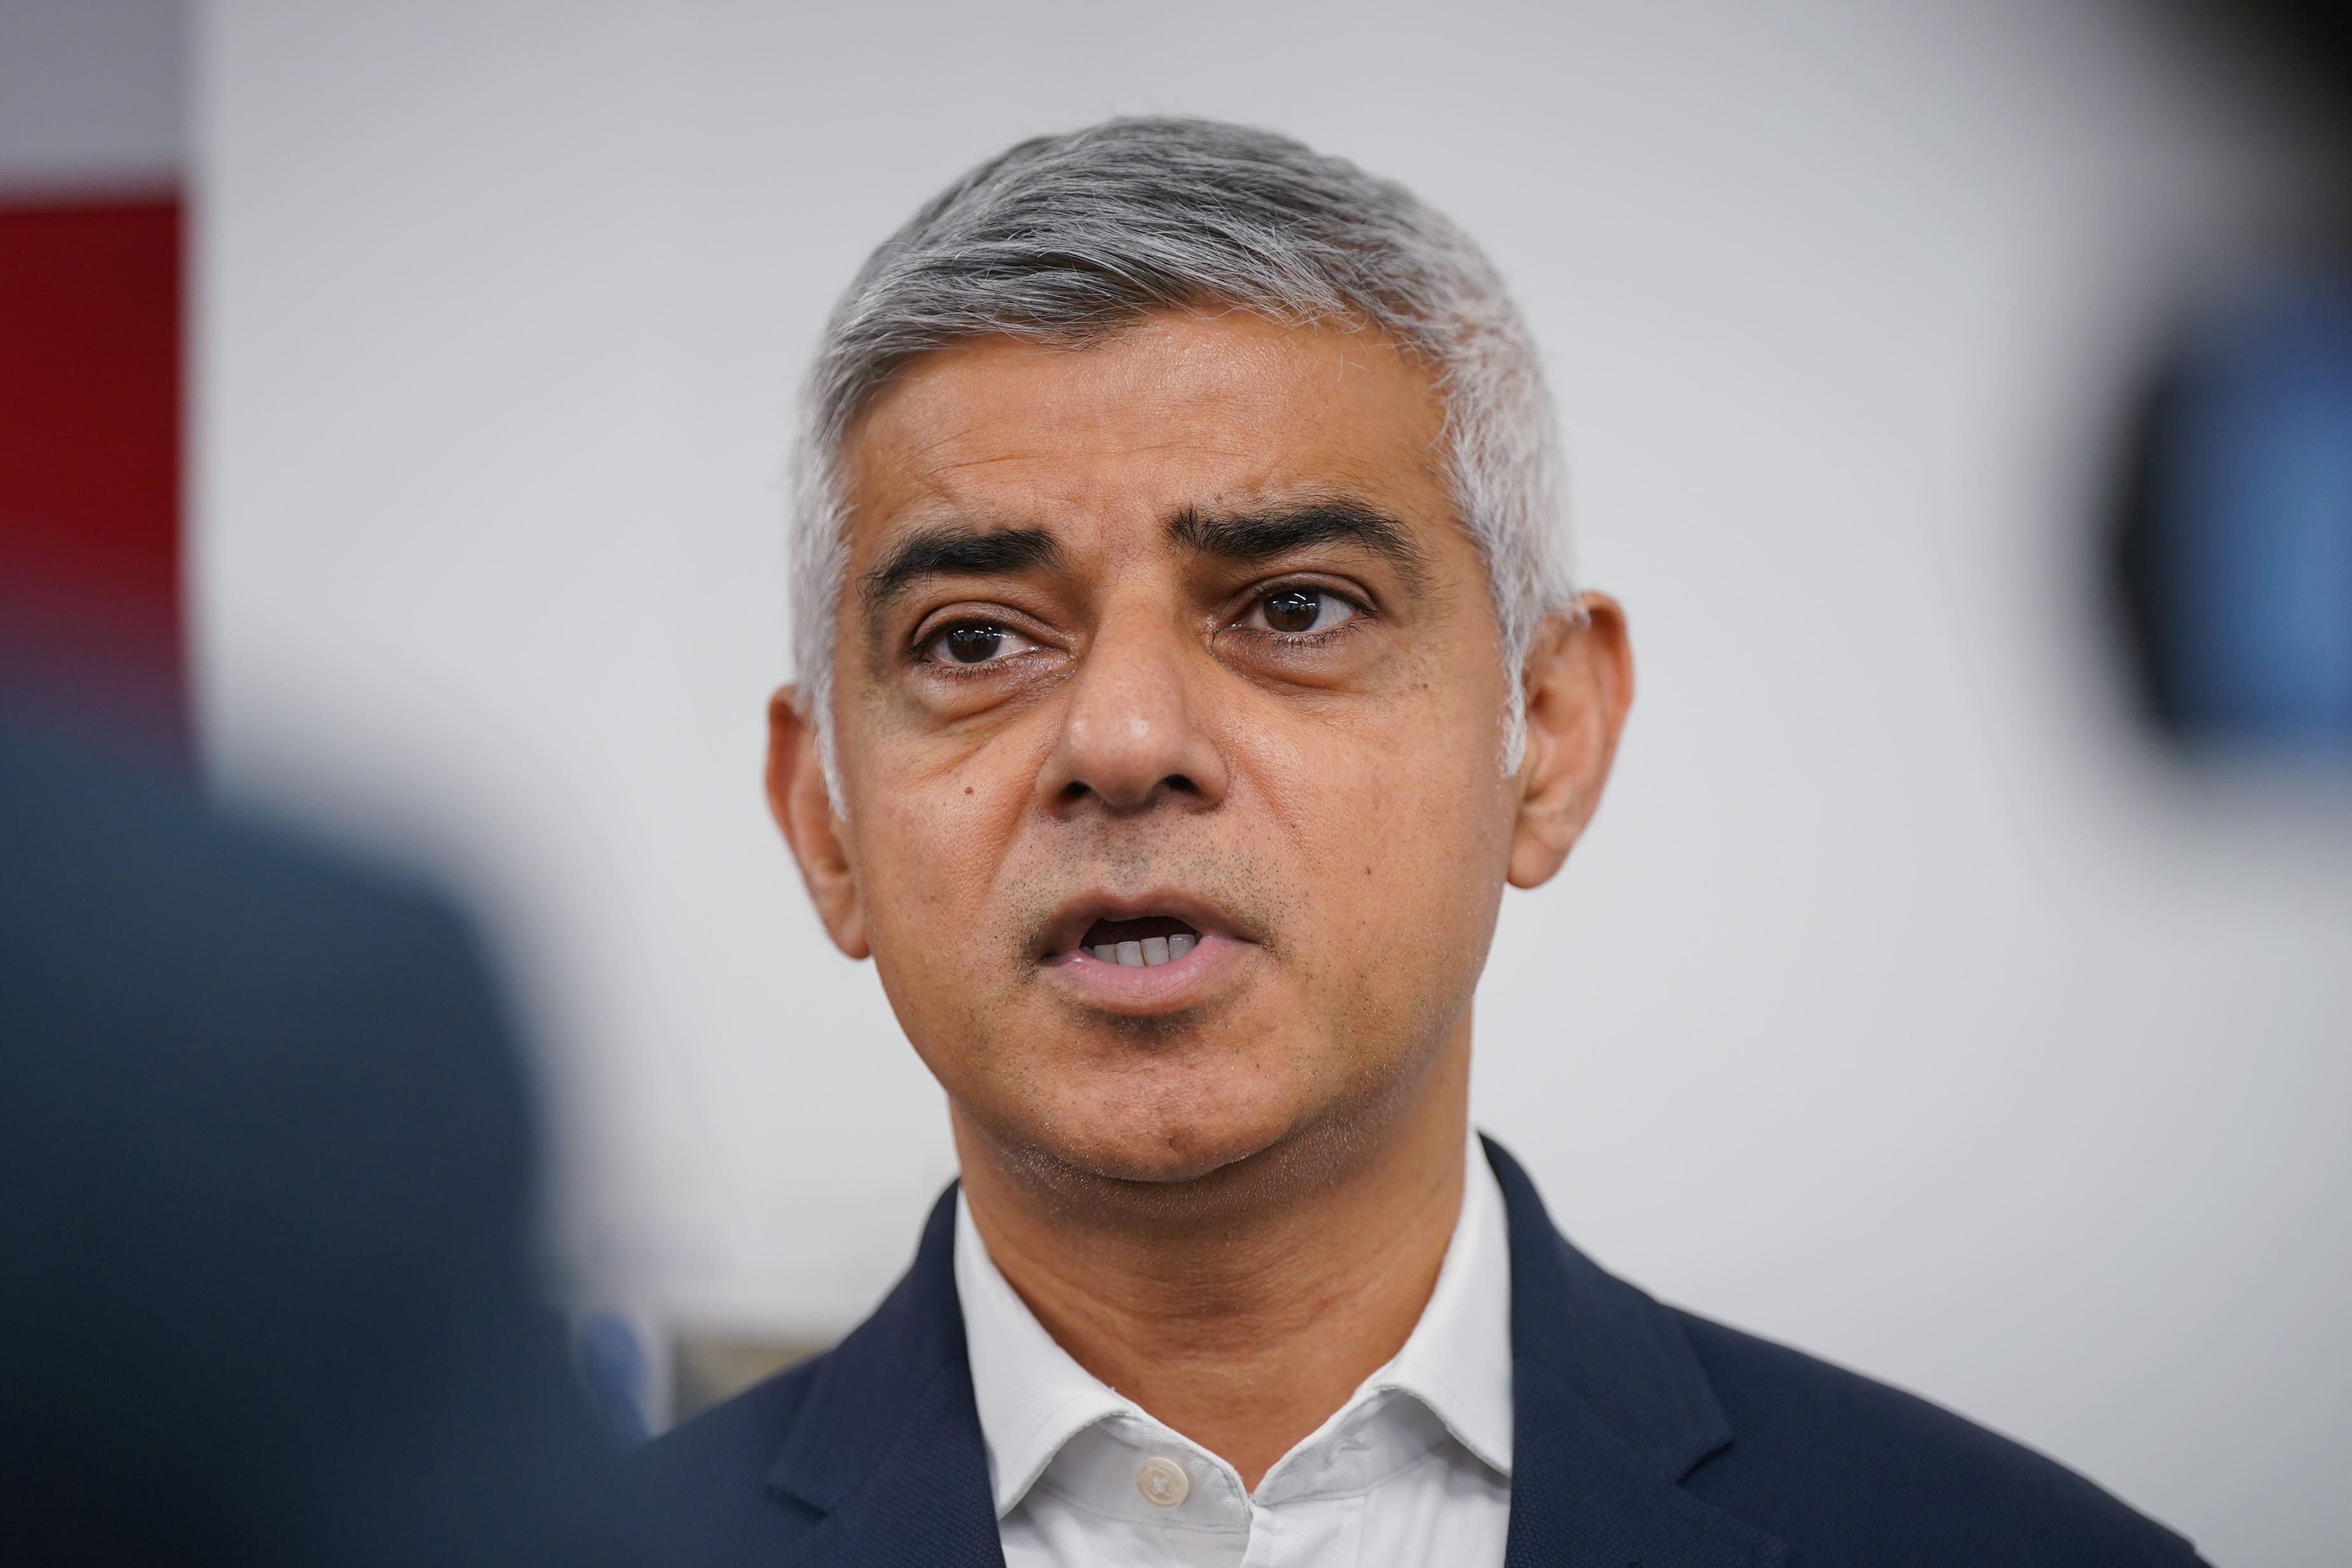 Mayor of London Sadiq Khan previously said all Central line carriages would have CCTV by 2023 (Yui Mok/PA)